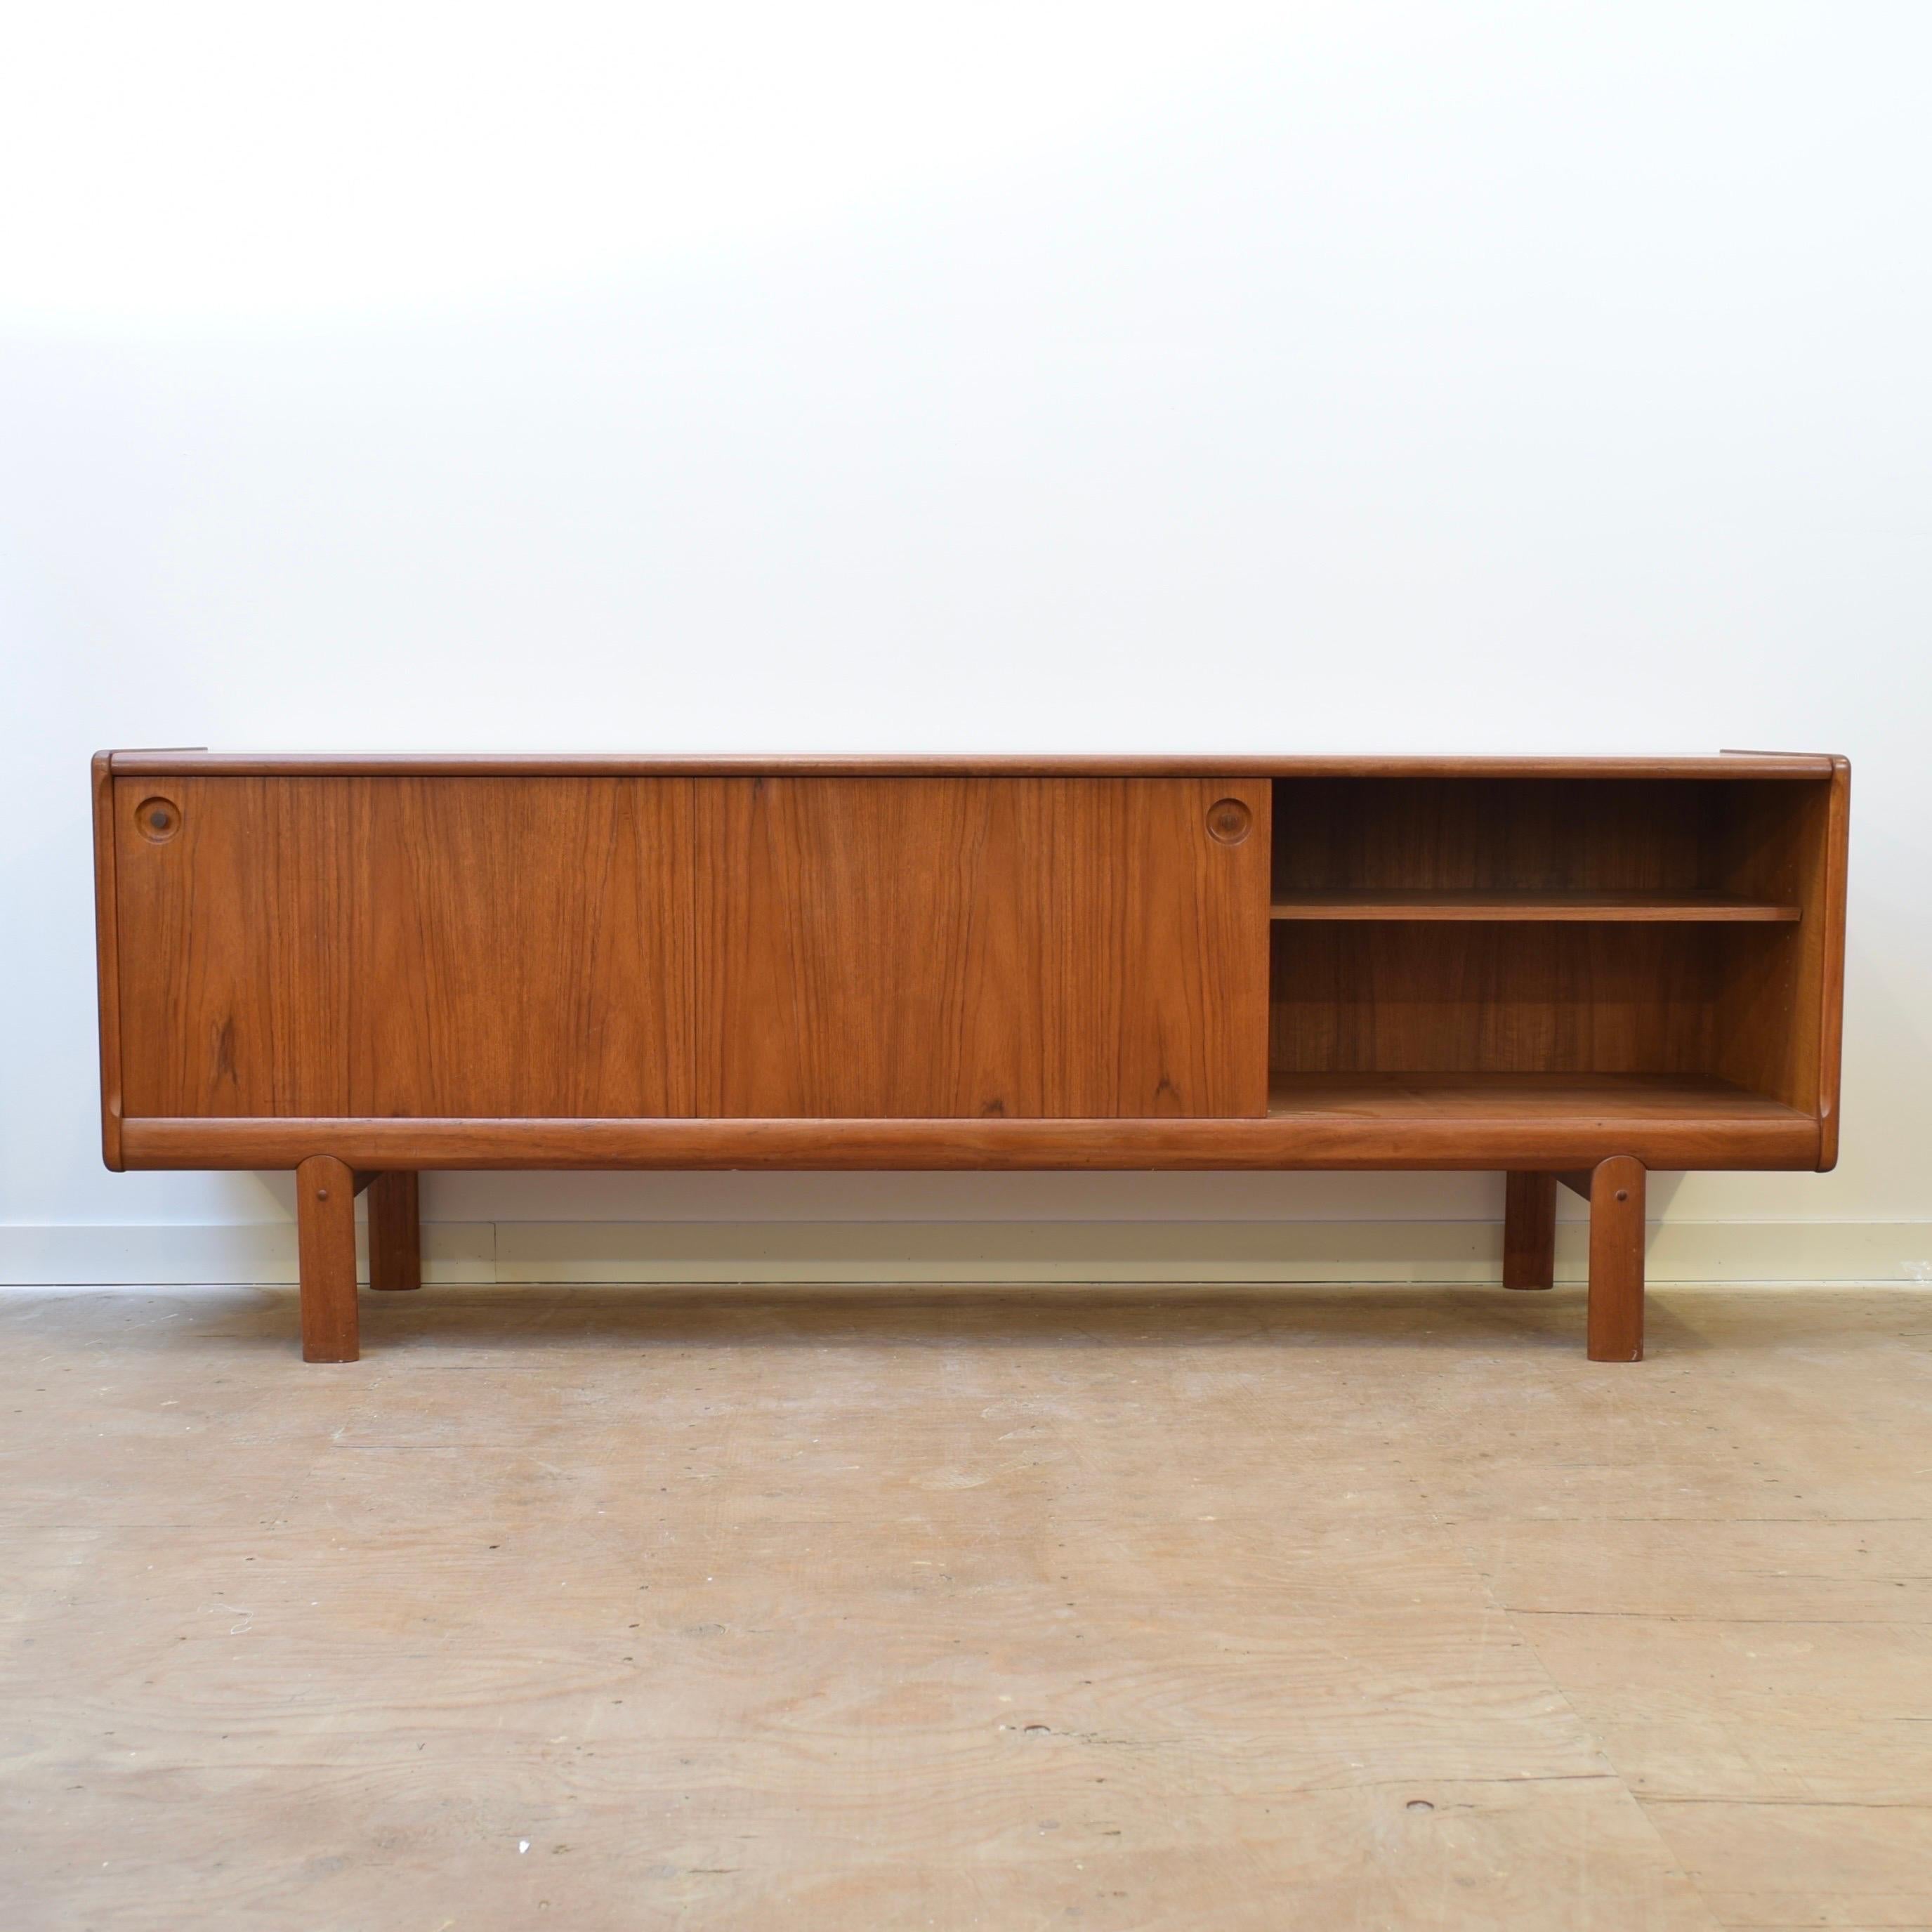 Condition: Great Vintage Condition

Dimensions: 89” L x 18” D x 31.25” H

Description: A vintage teak sideboard designed by H.W. Klein for Brahmin. Made in Denmark, circa 1960s. Quality construction. 